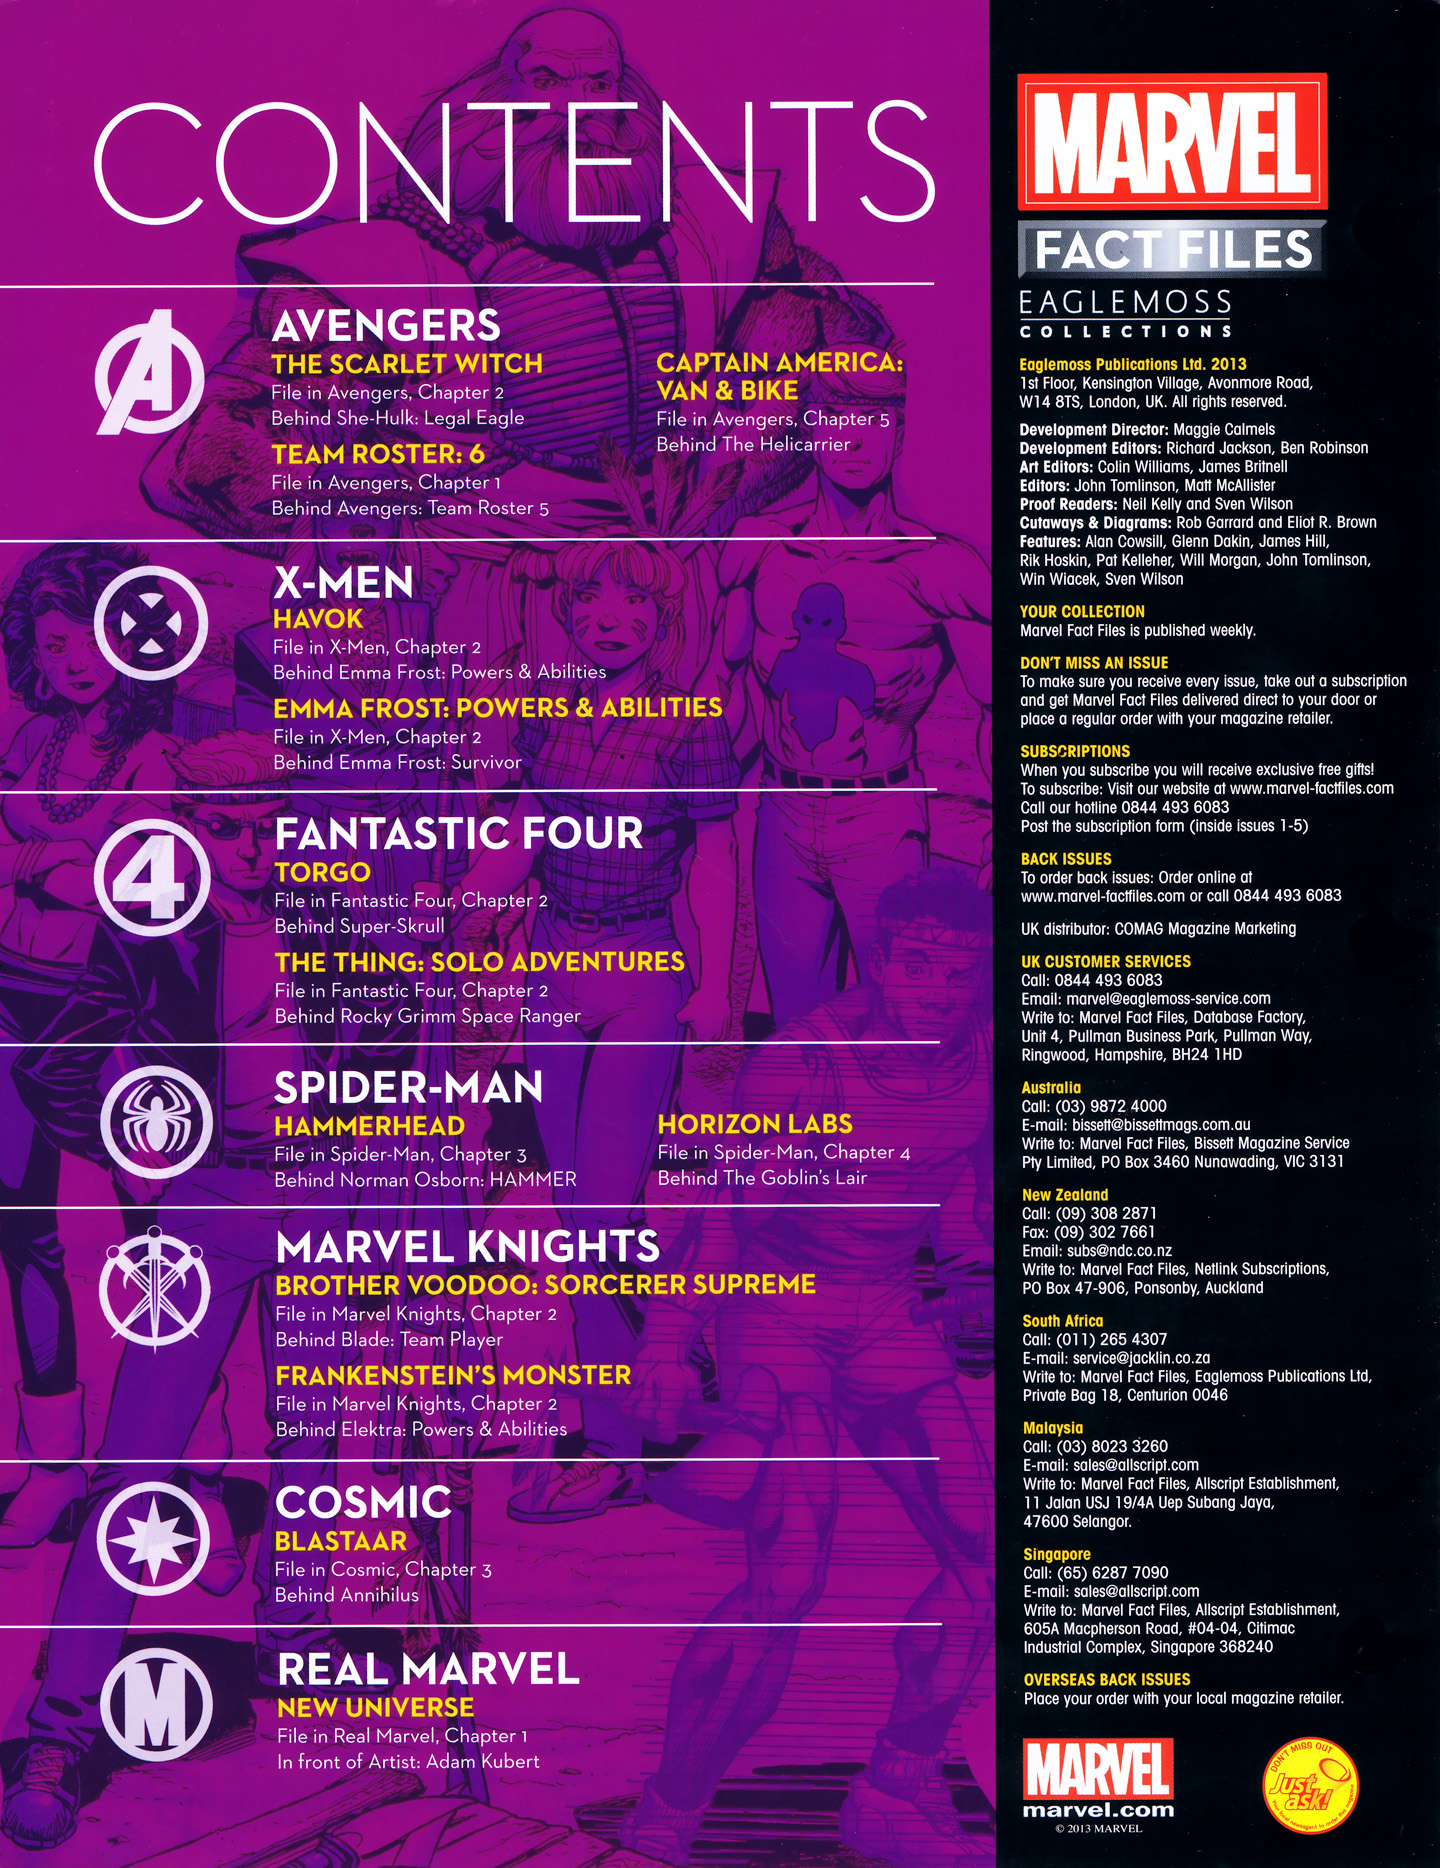 Read online Marvel Fact Files comic -  Issue #33 - 3